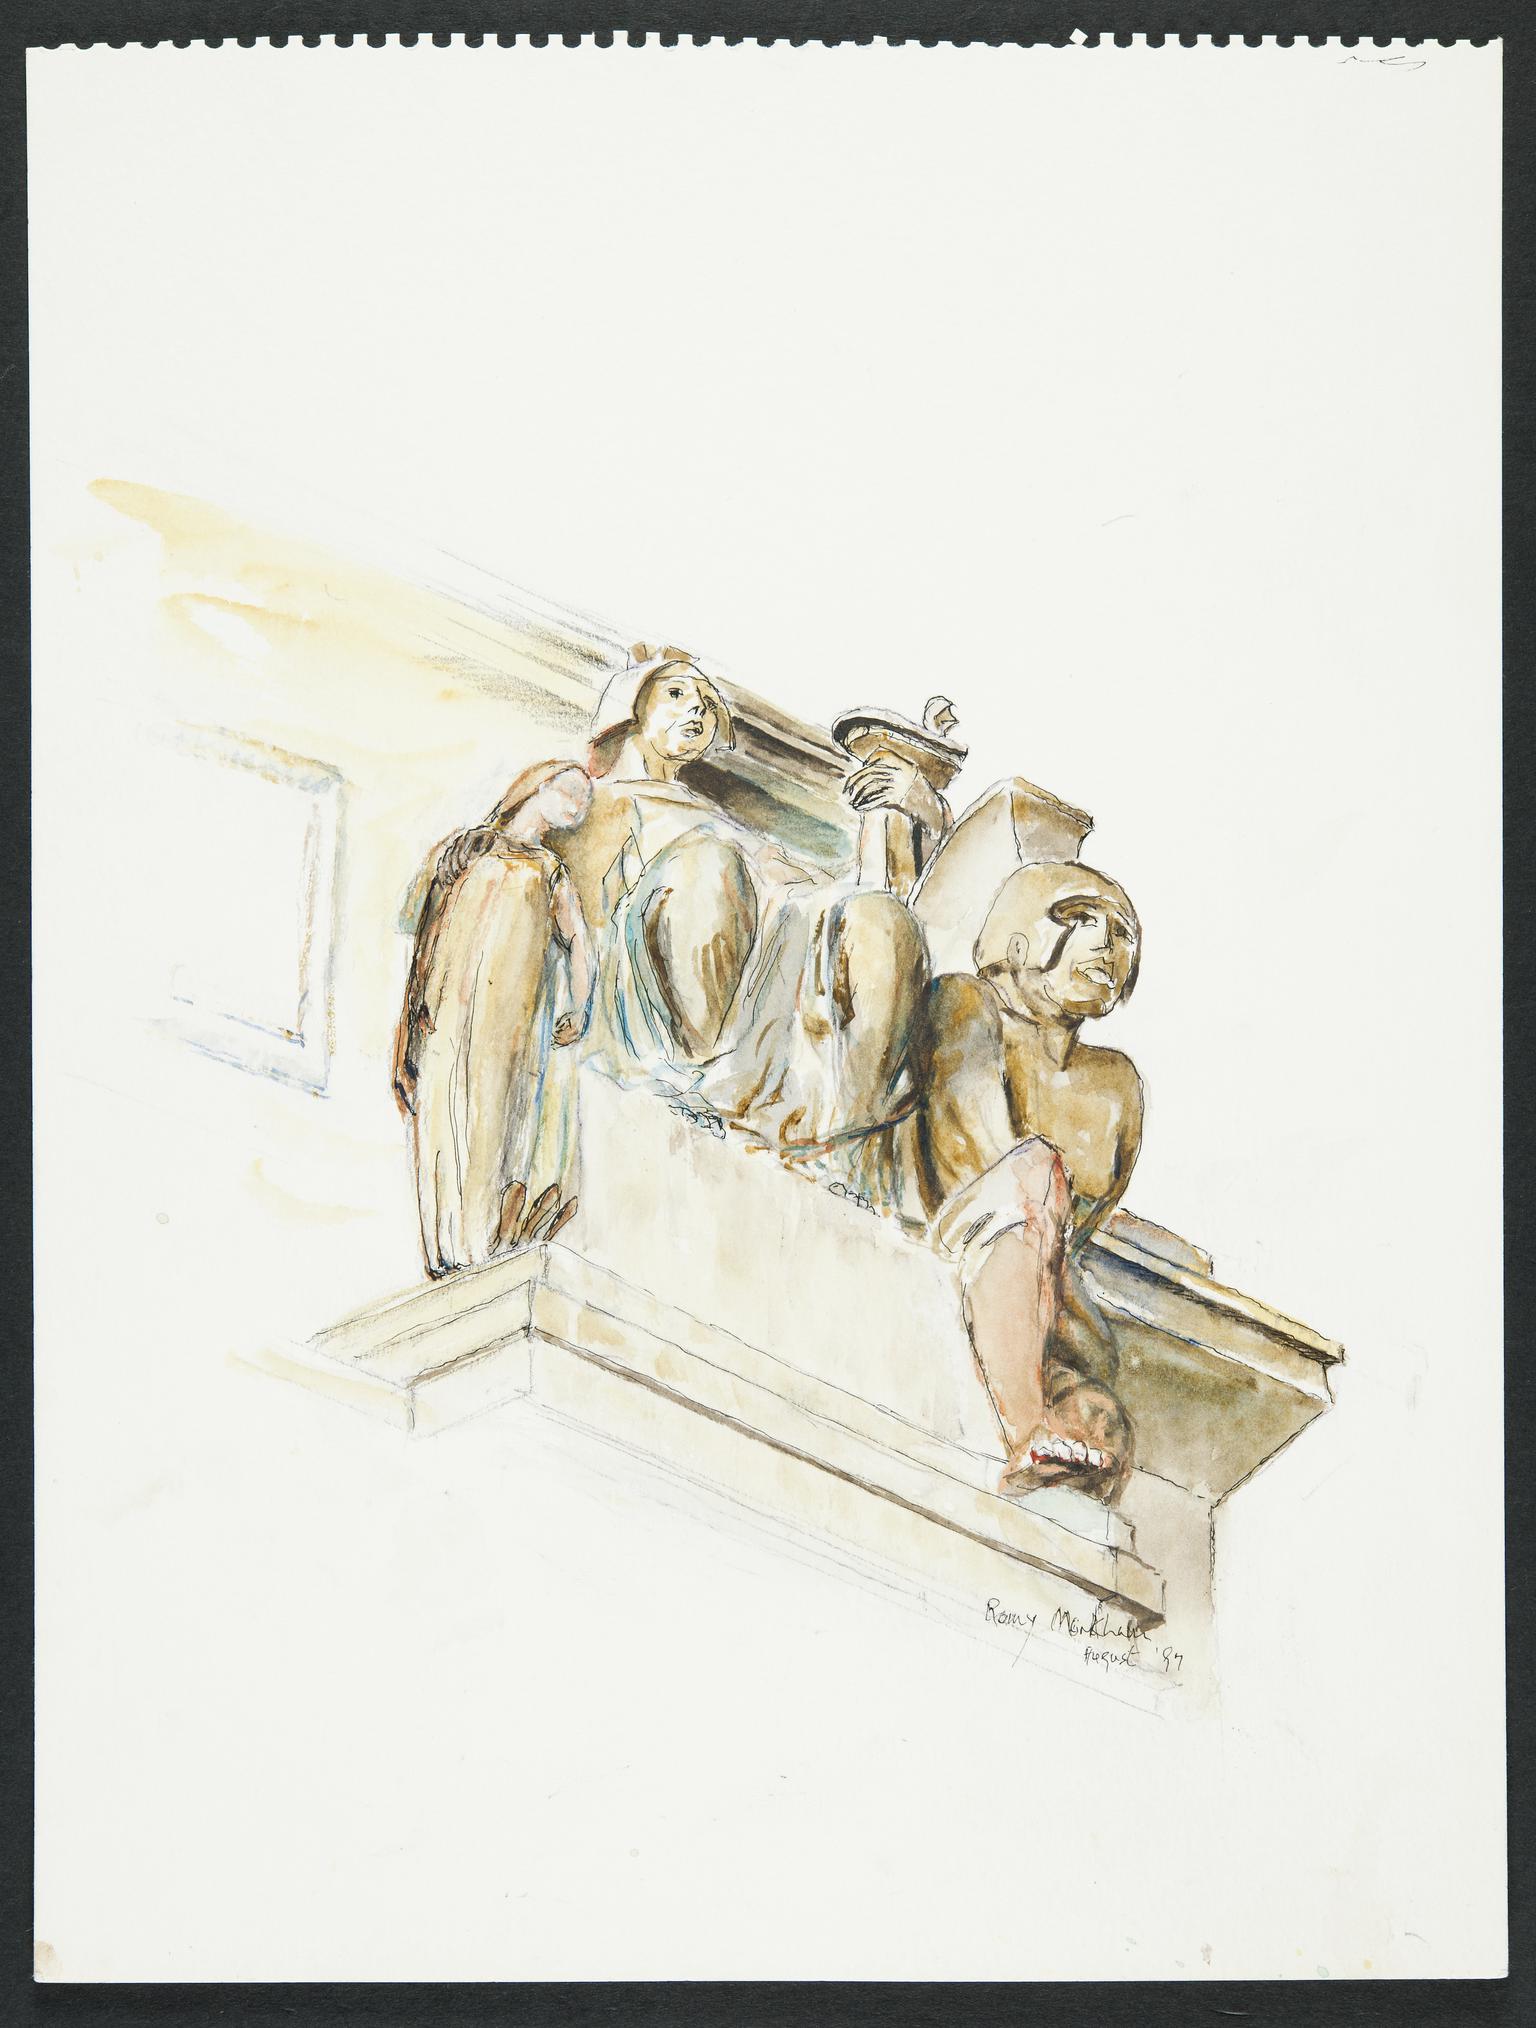 Sculpture on the National Museum of Wales, drawing